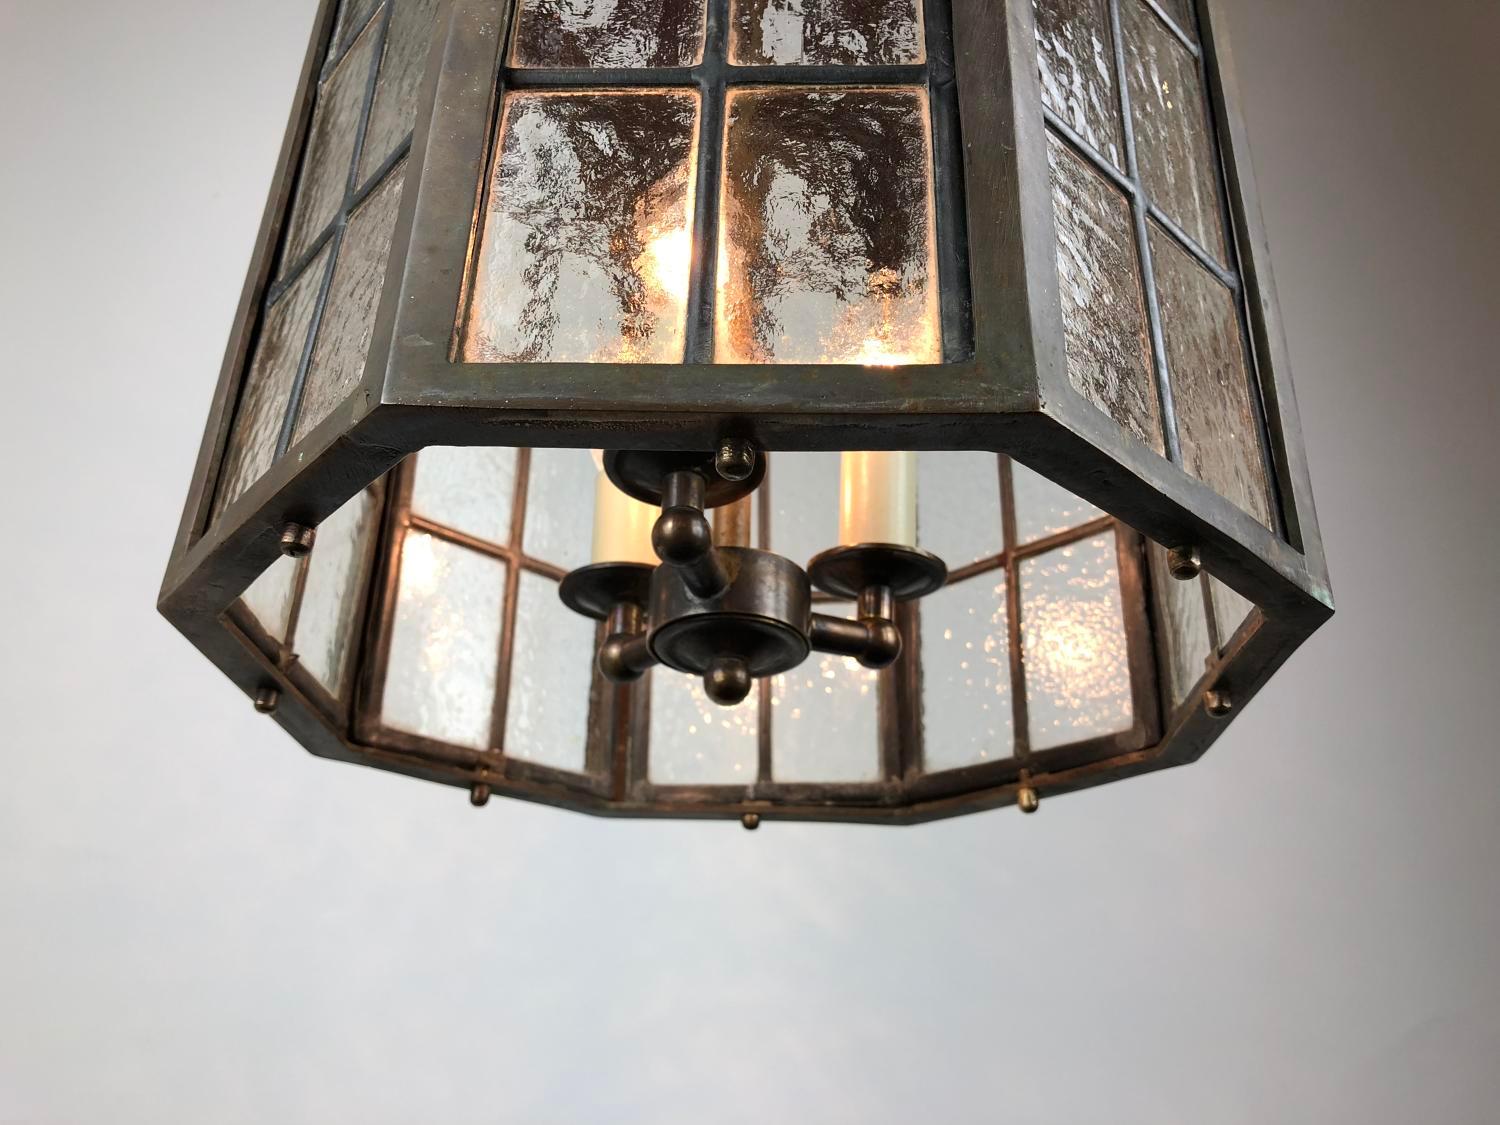 English Neogothic Brass Hall Lantern, Late 19th Century Gothic Style, with Lead Lattice